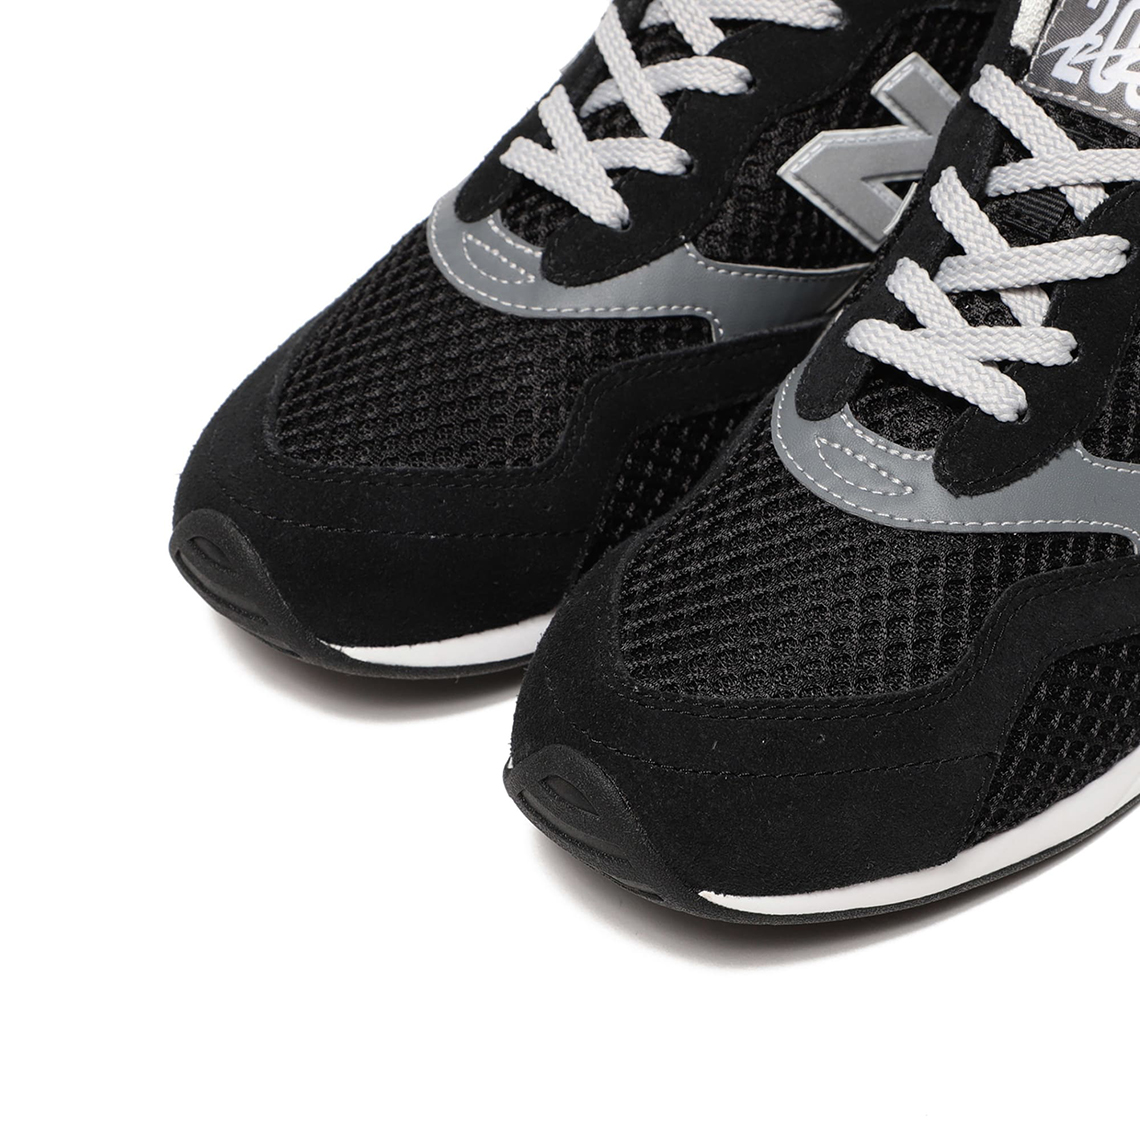 Beams New Balance Rc205 Release Date 9